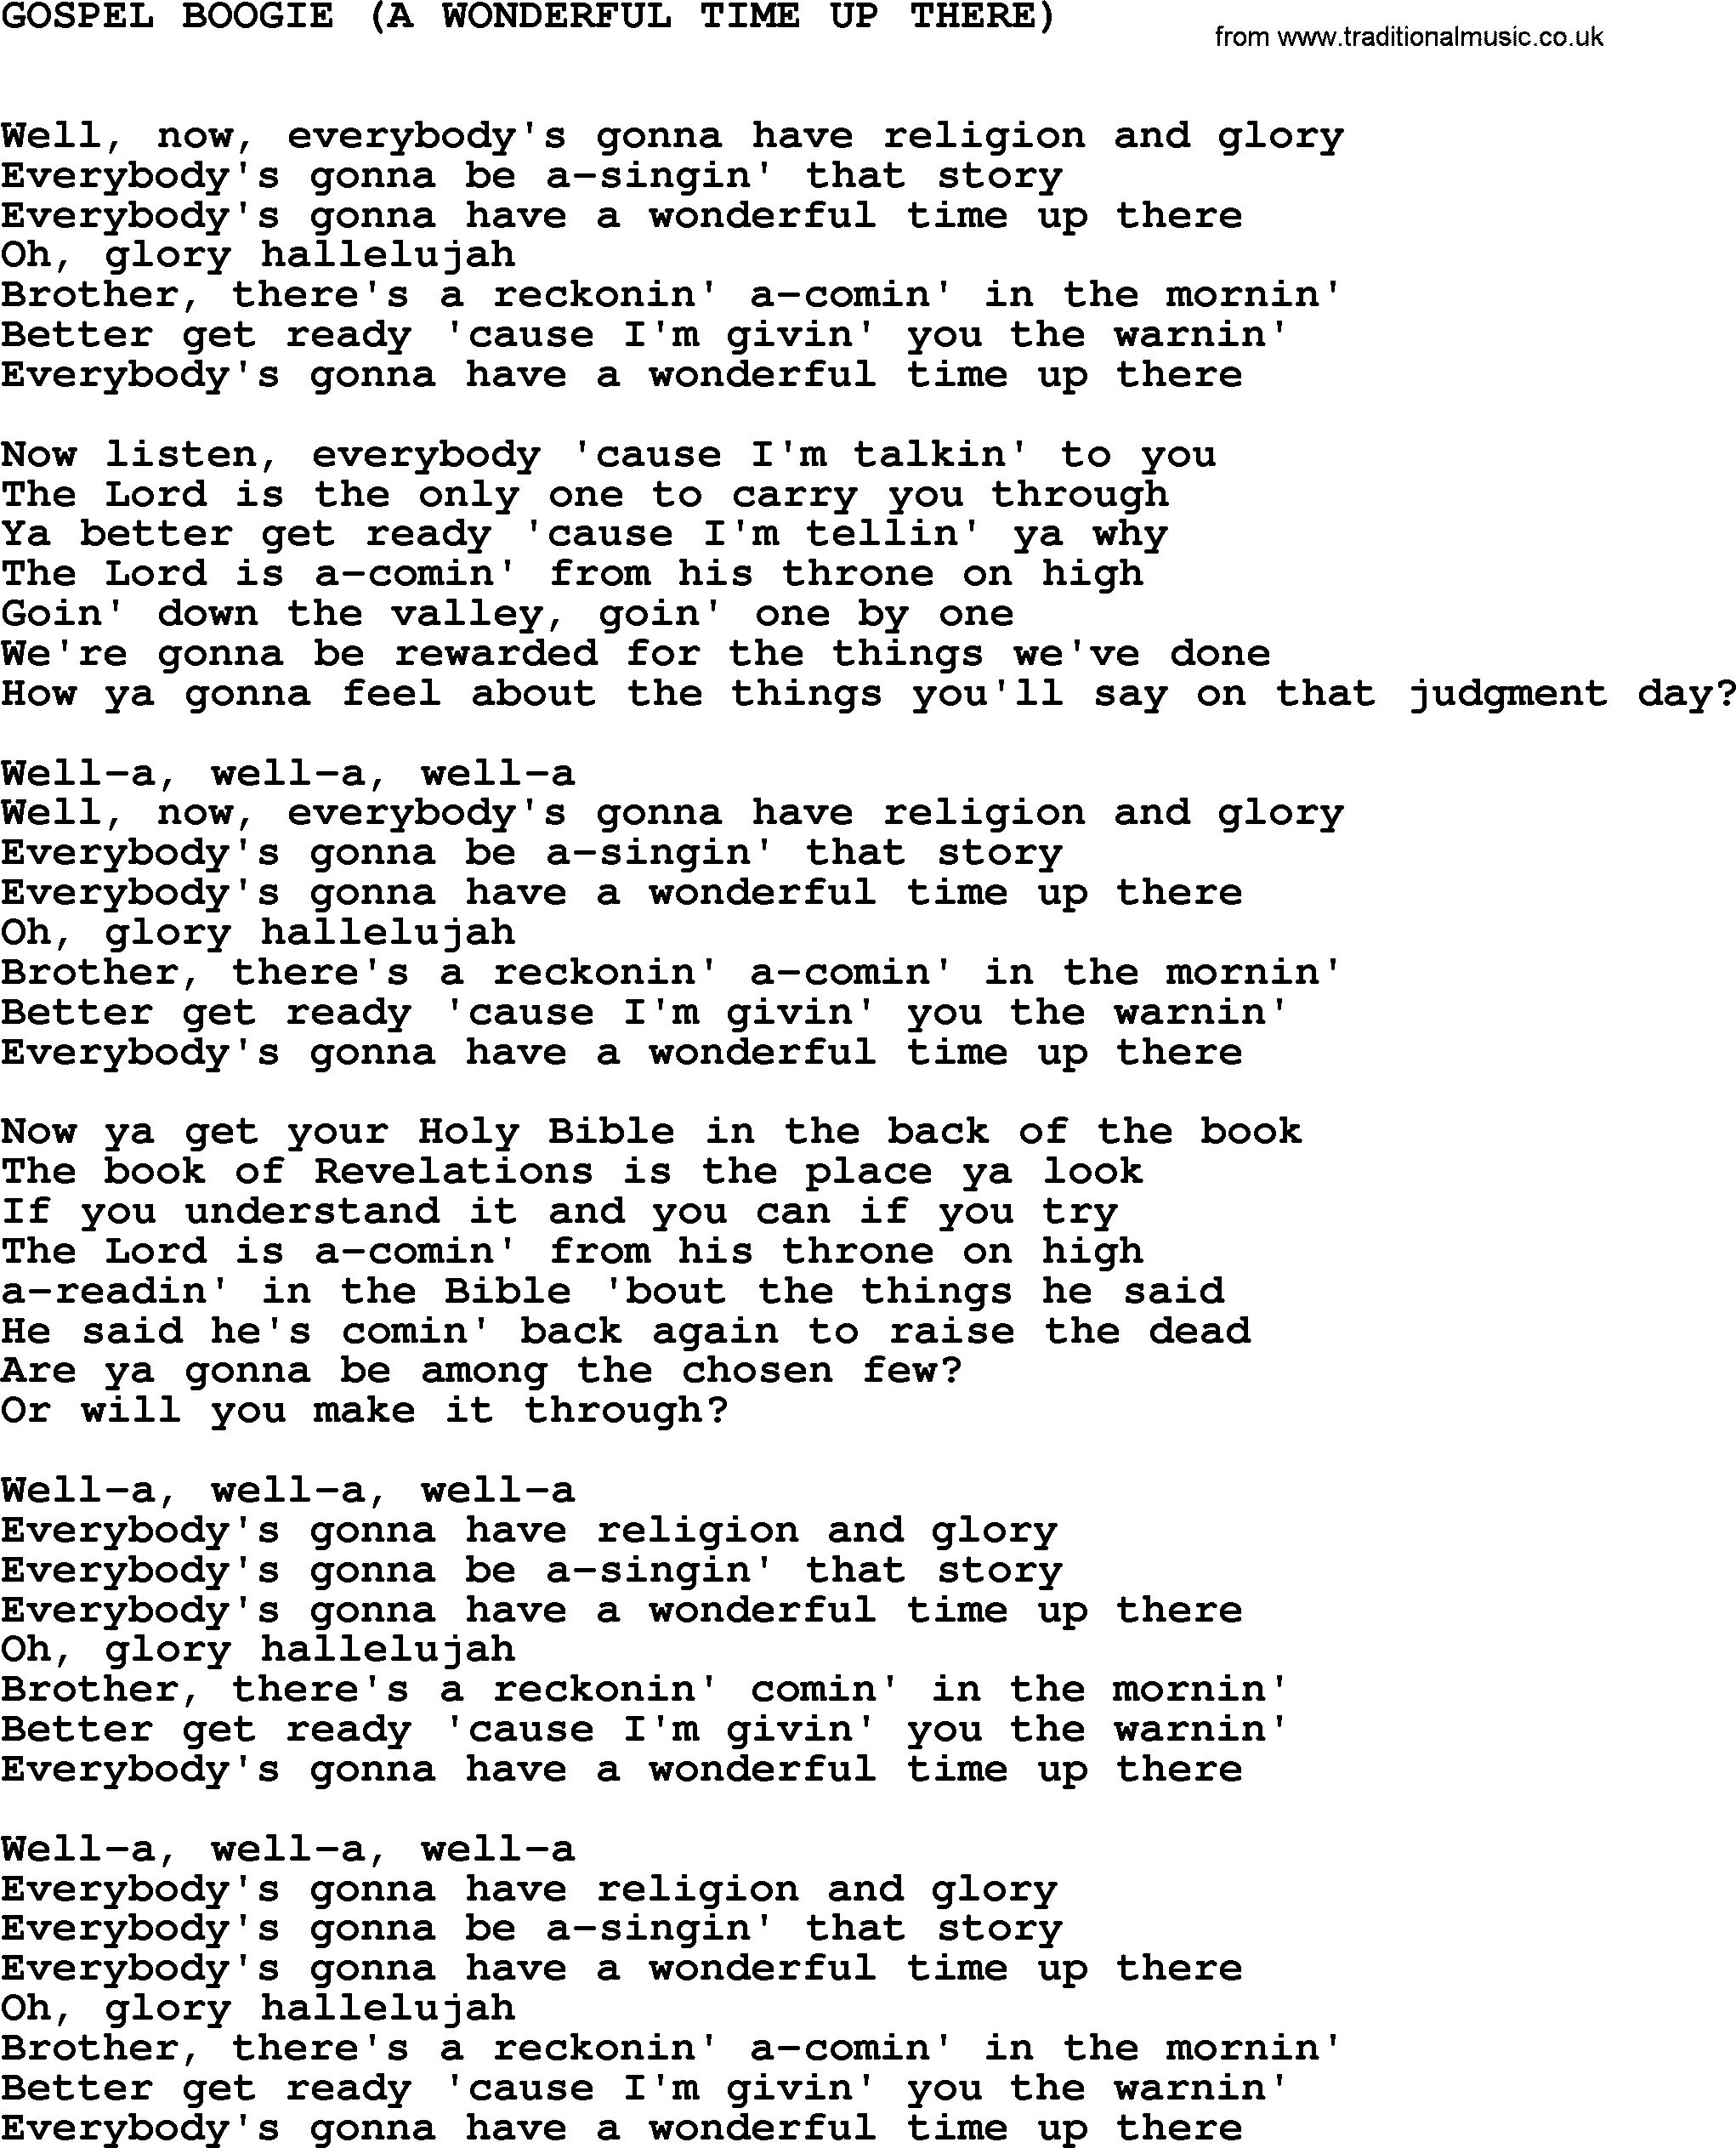 Johnny Cash song Gospel Boogie(A Wonderful Time Up There).txt lyrics